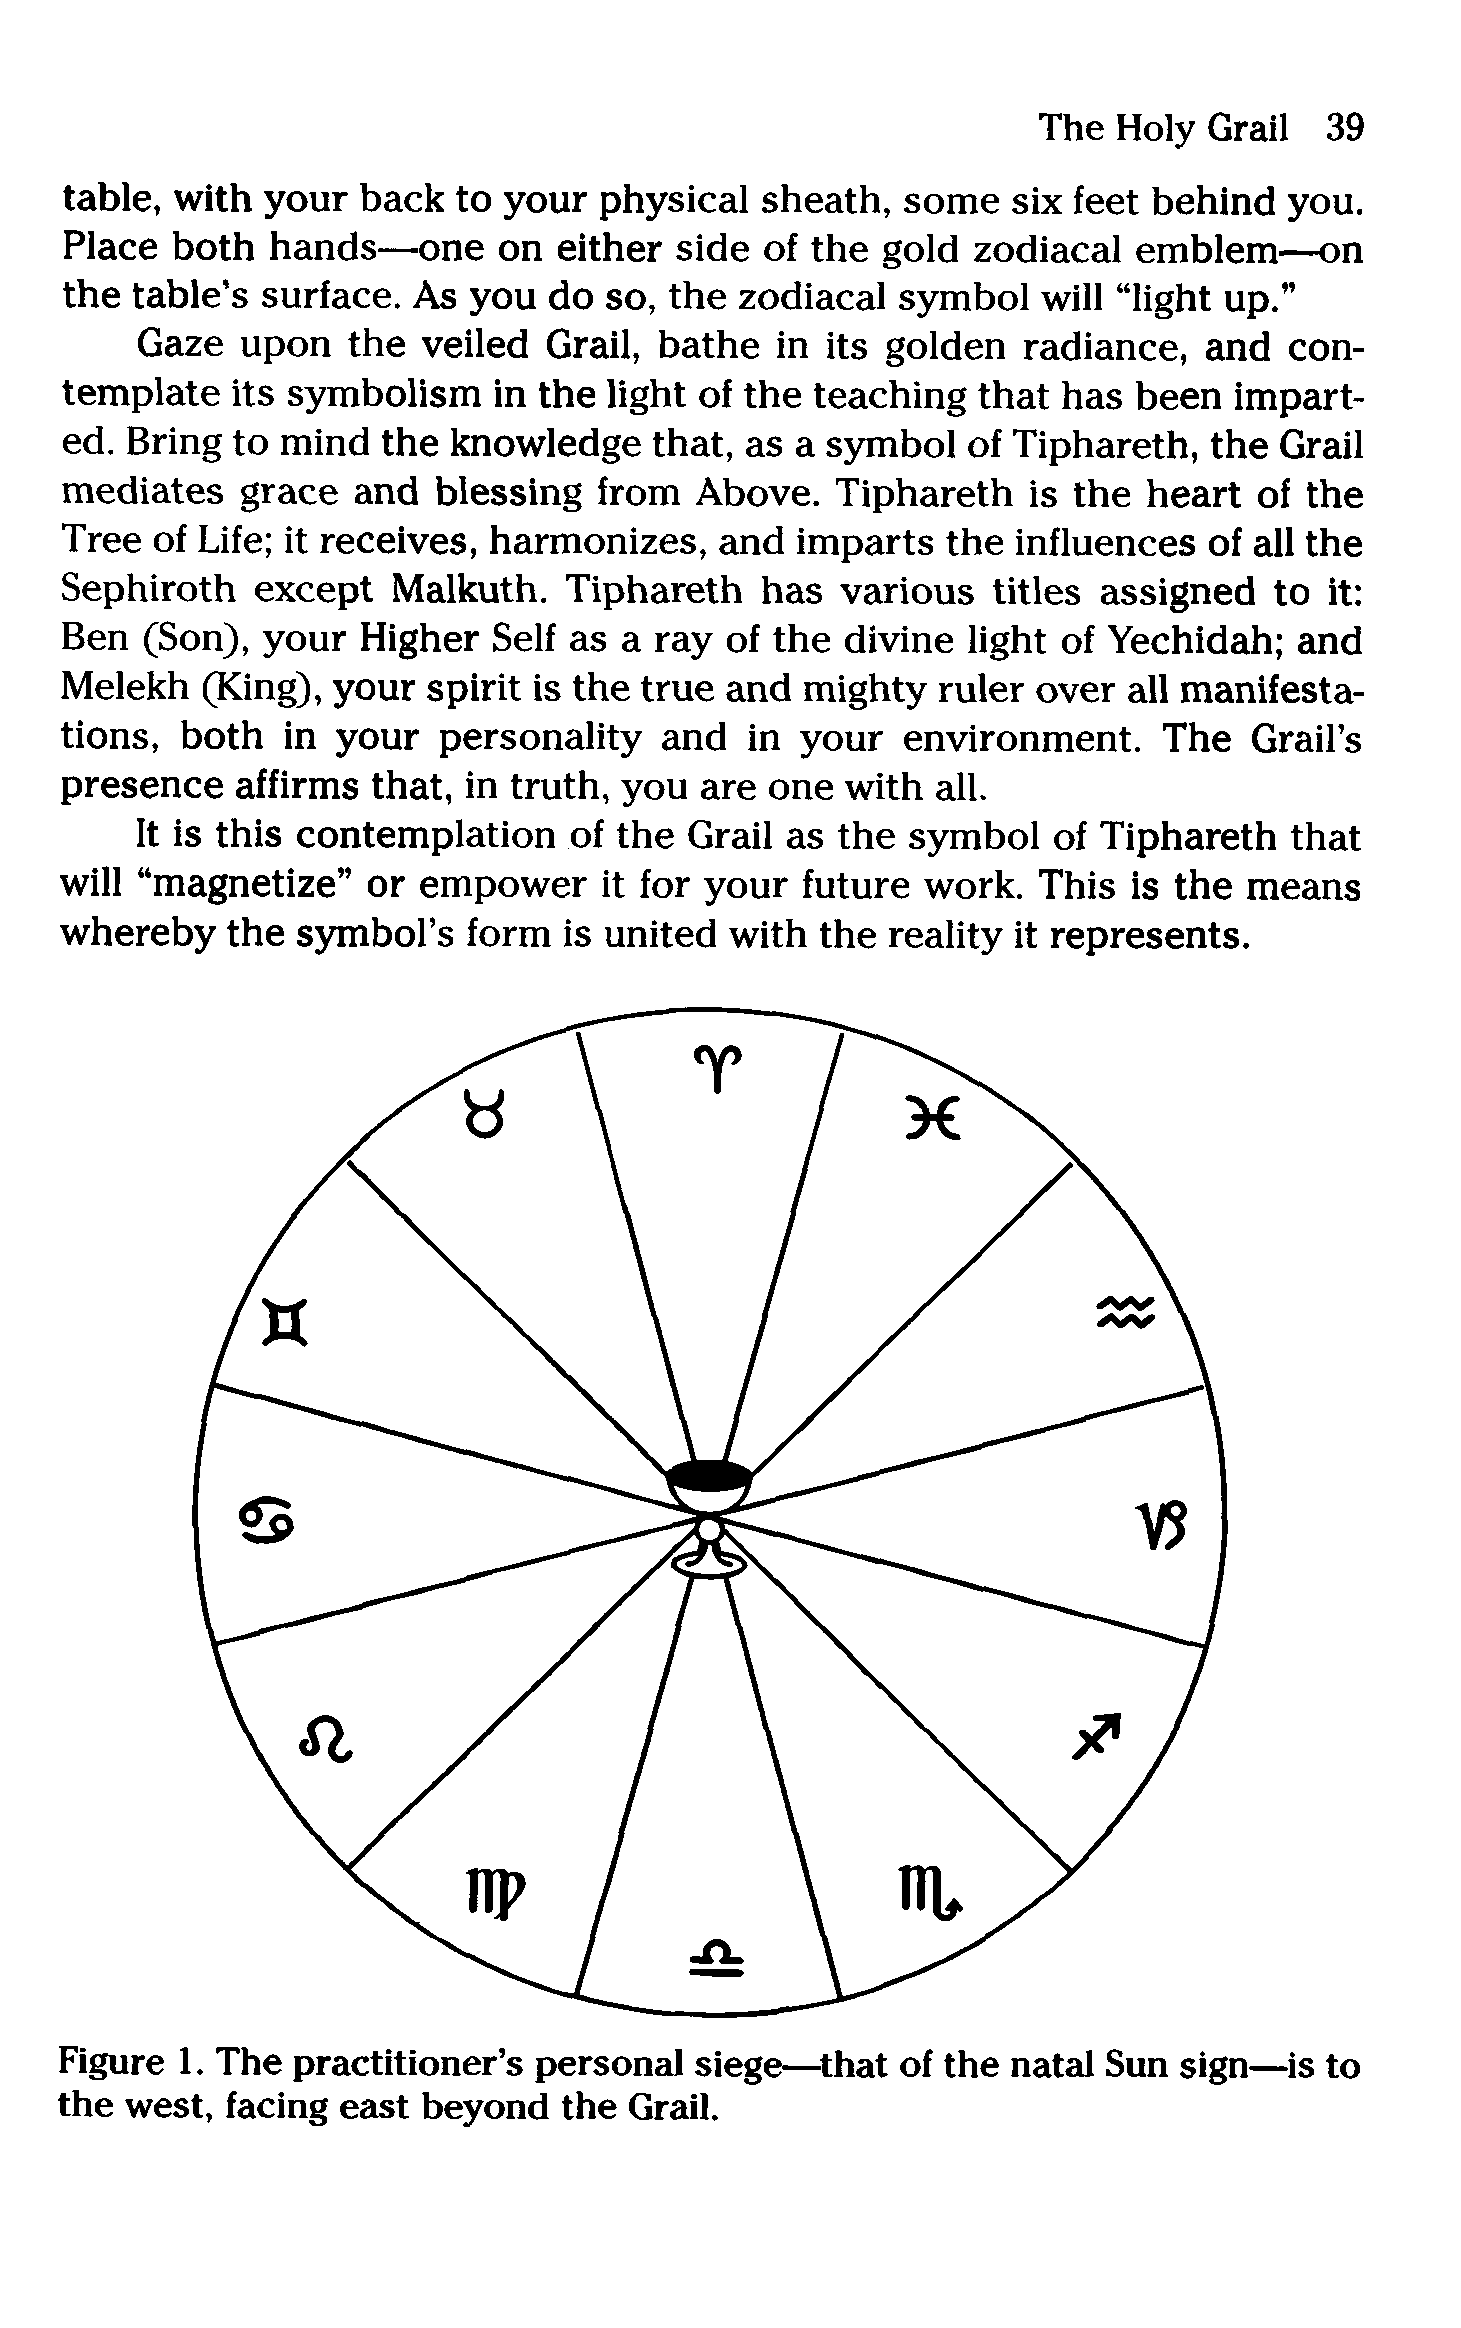 Figure 1. The practitioner s personal siege—that of the natal Sun sign—is to the west, facing east beyond the Grail.